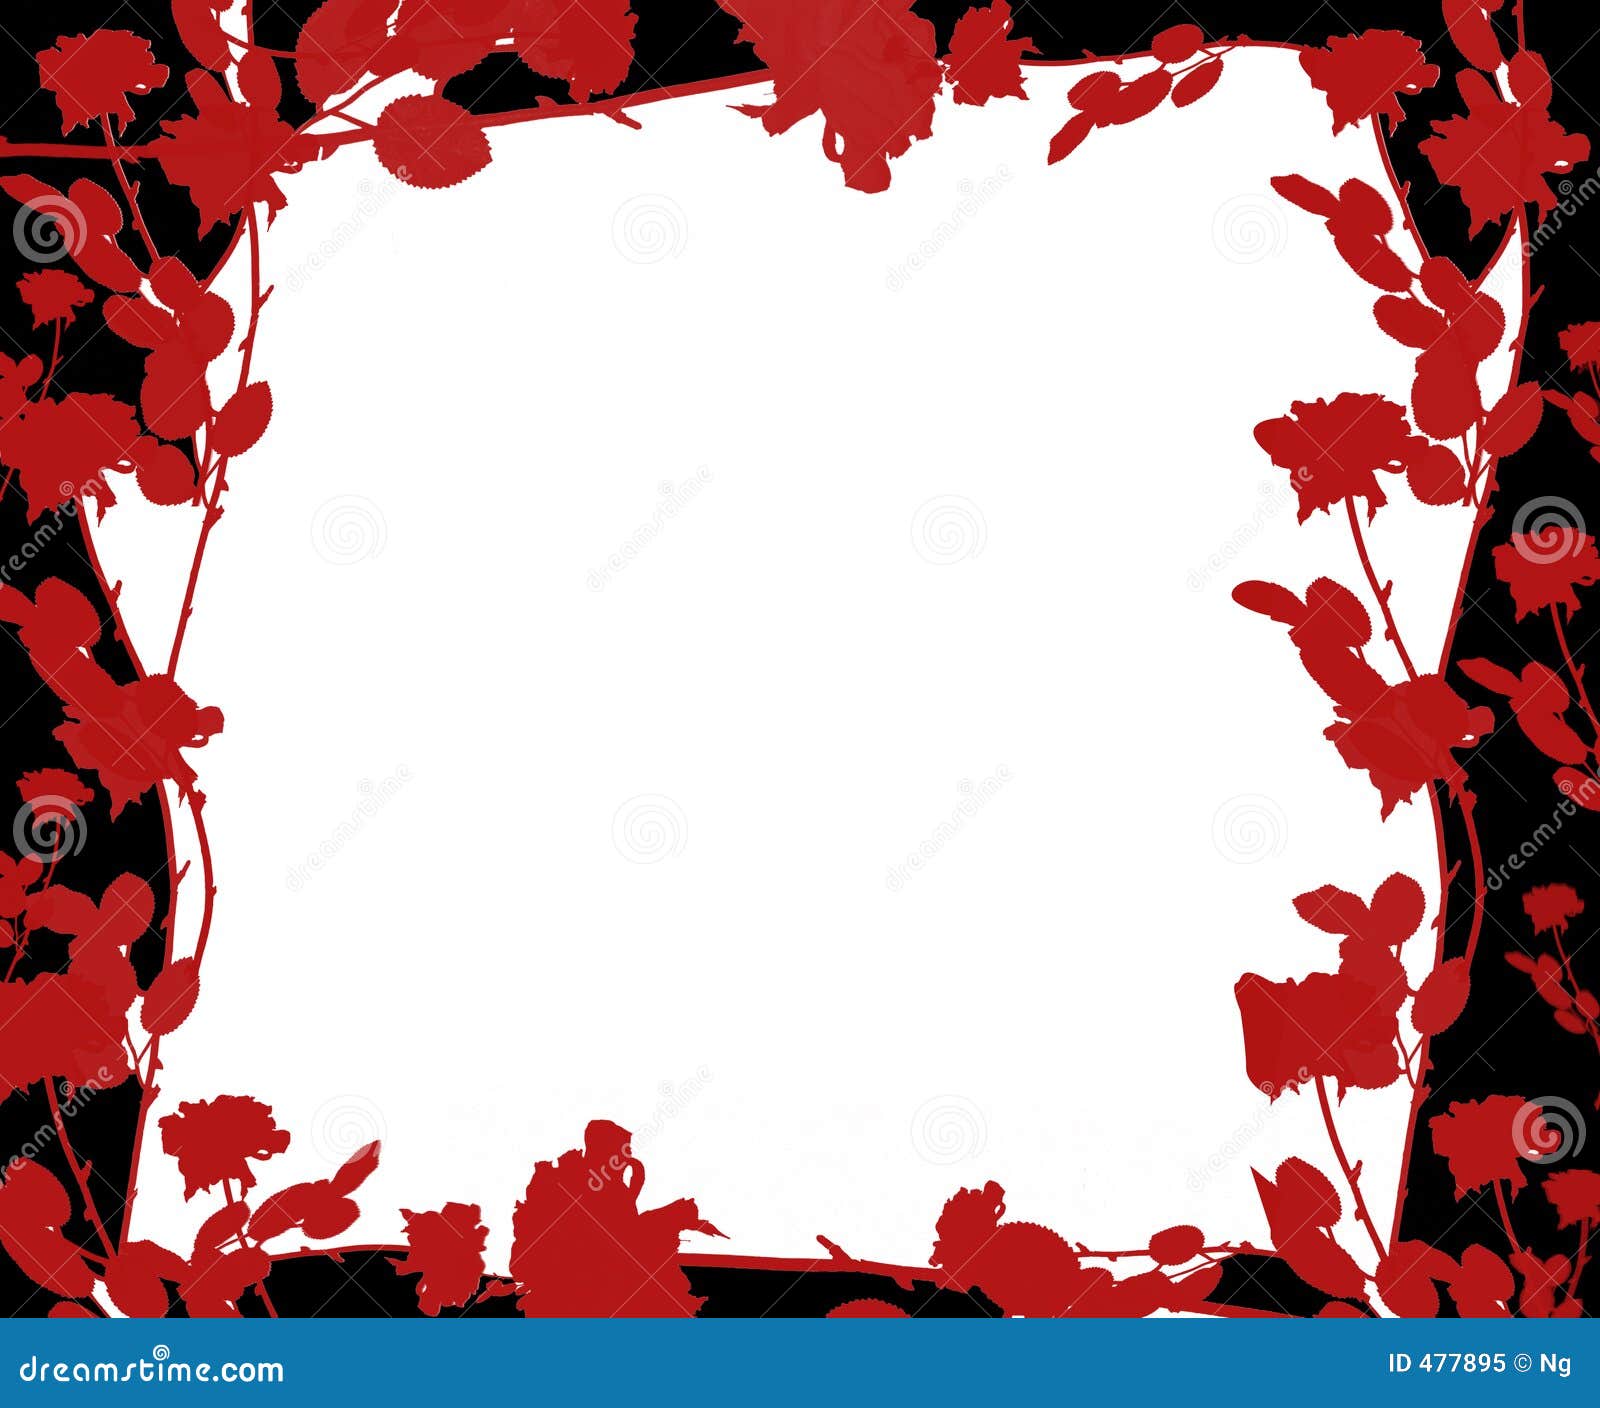 clipart red roses border - photo #16